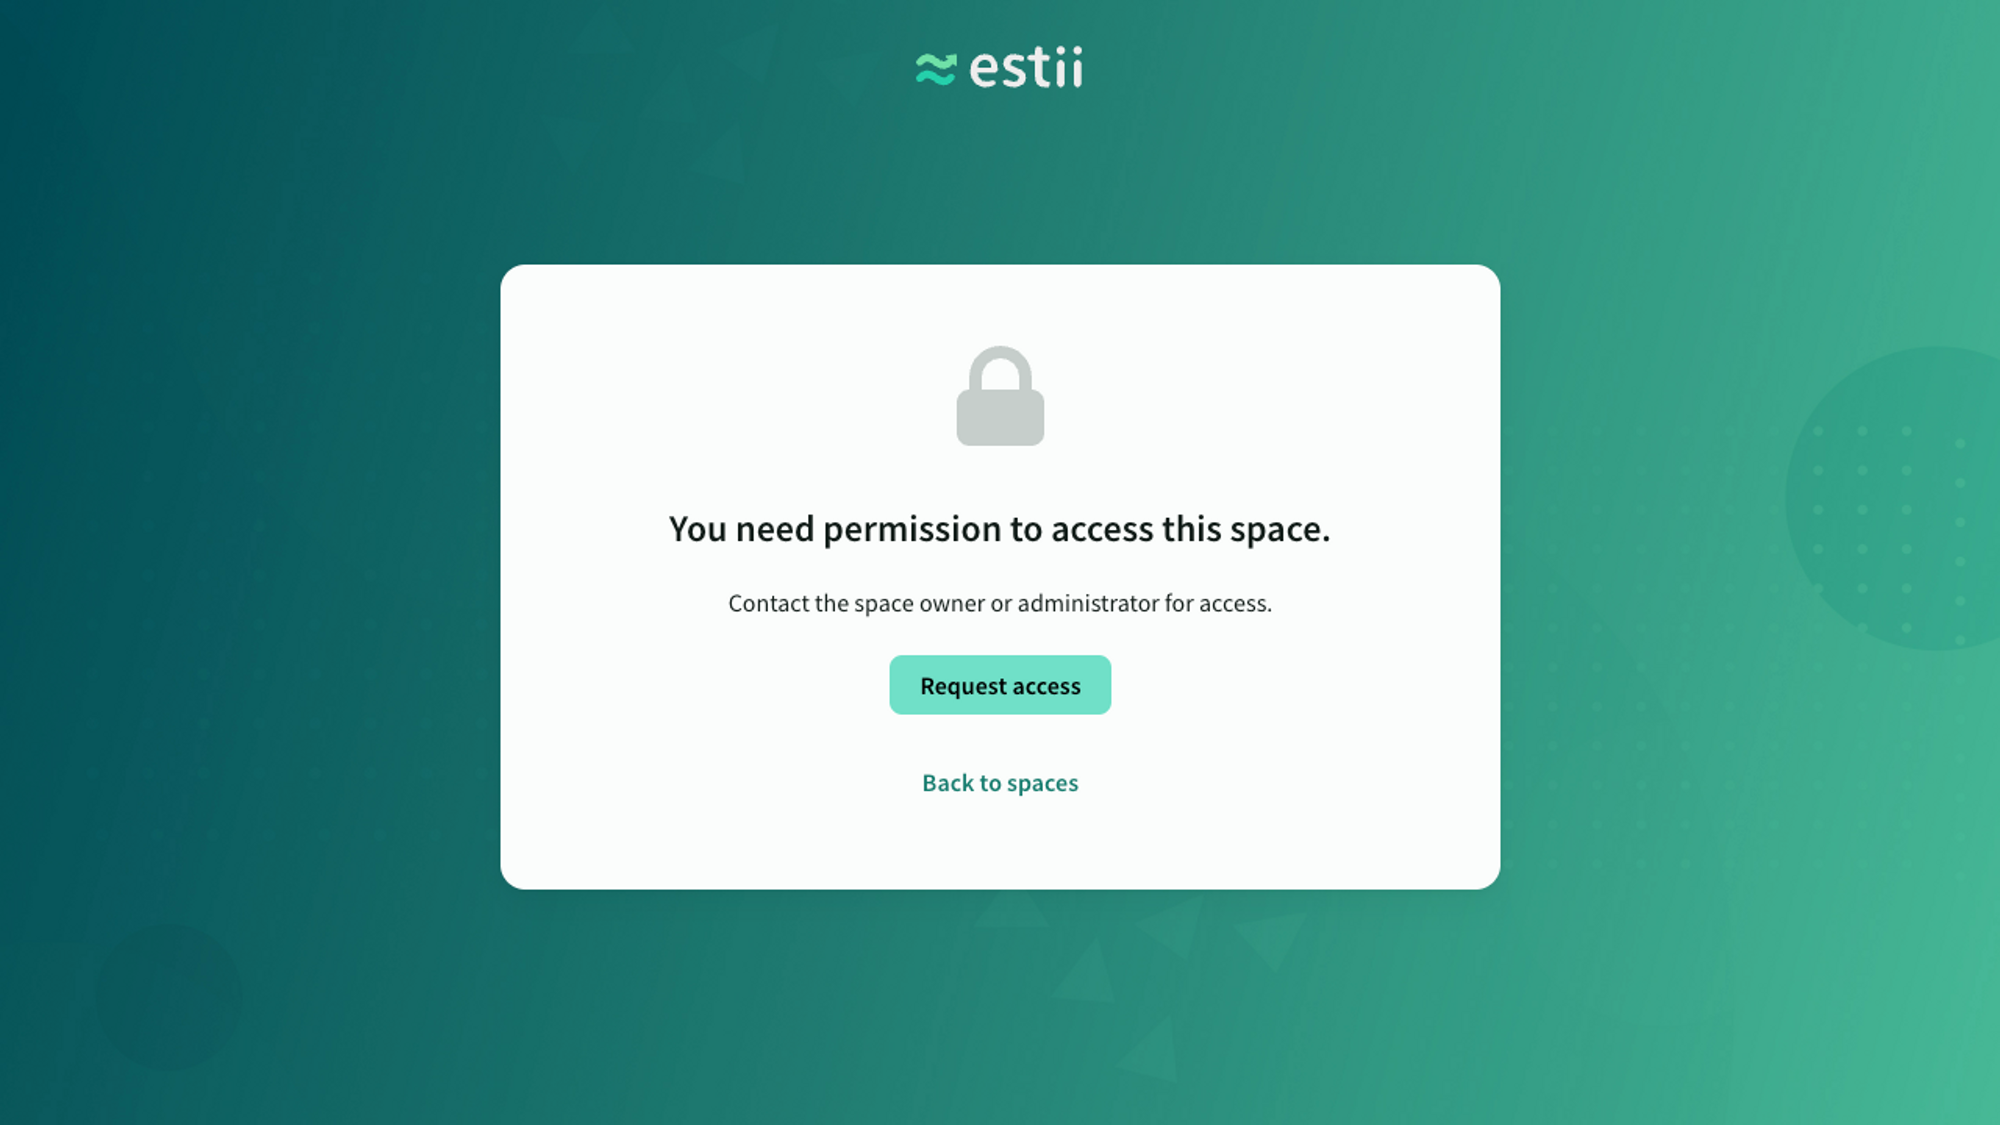 External users can now request access to a space